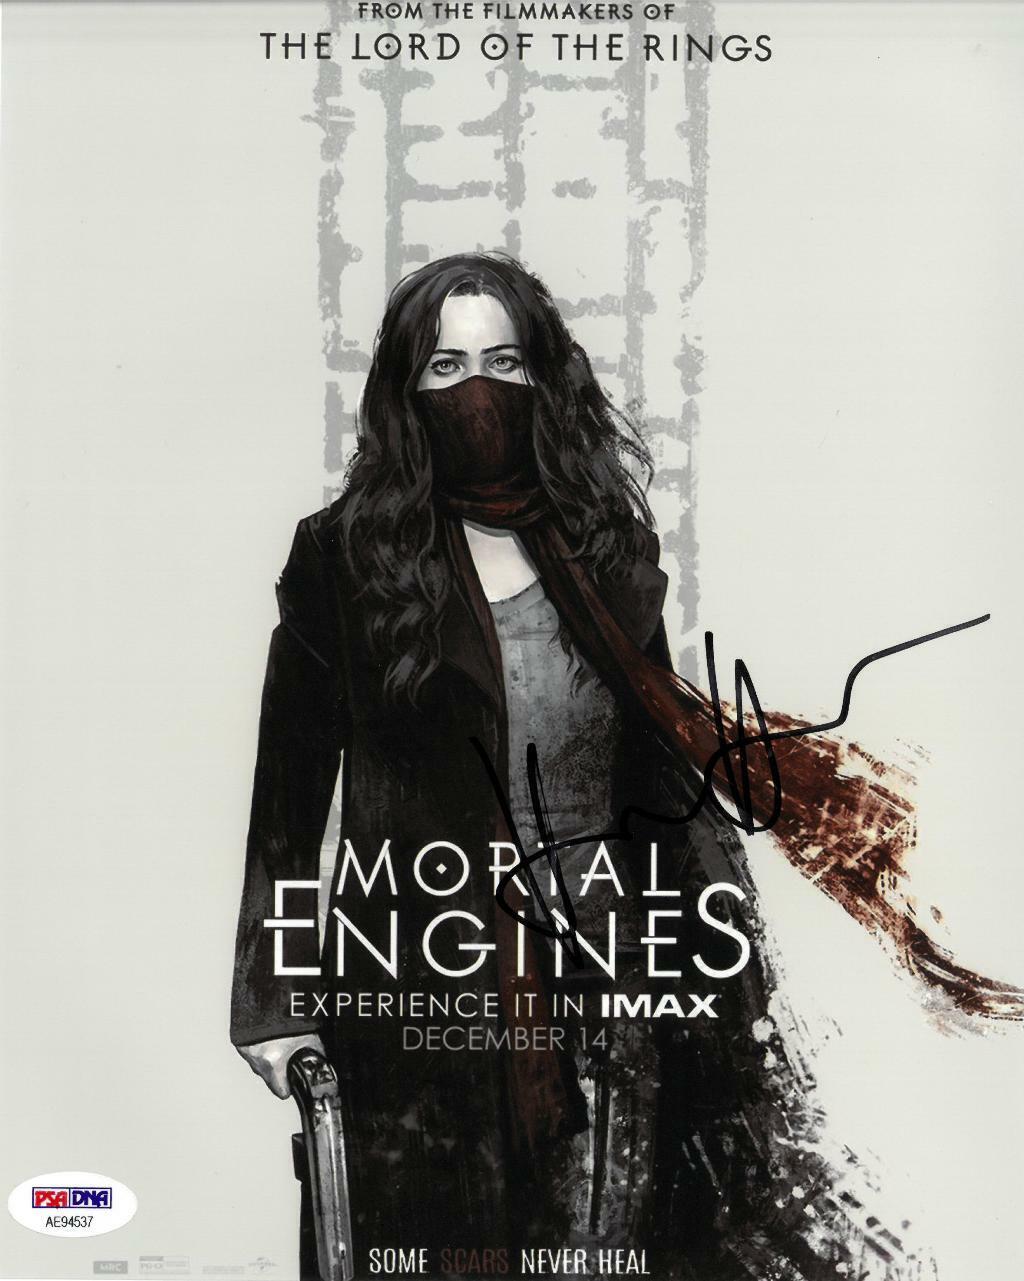 Hera Hilmar Signed Mortal Engines Autographed 8x10 Photo Poster painting PSA/DNA #AE94537